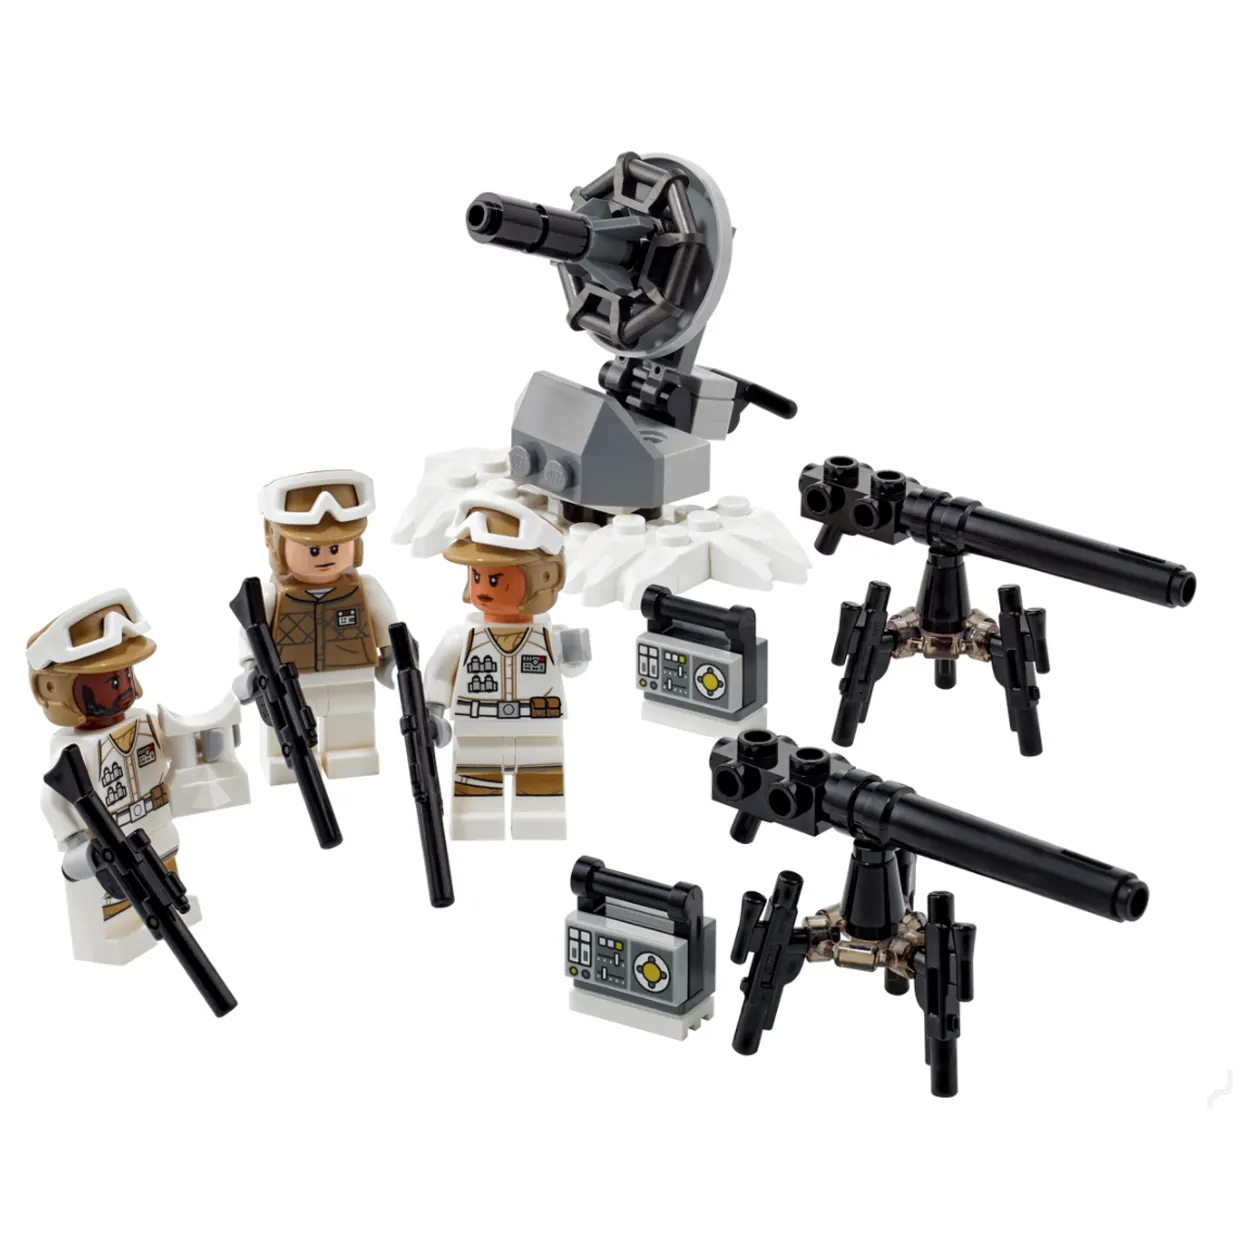 LEGO Star Wars 40557 Defence of Hoth, 40558 Clone Trooper™ Command Station New Products for Jan. 1st 2022